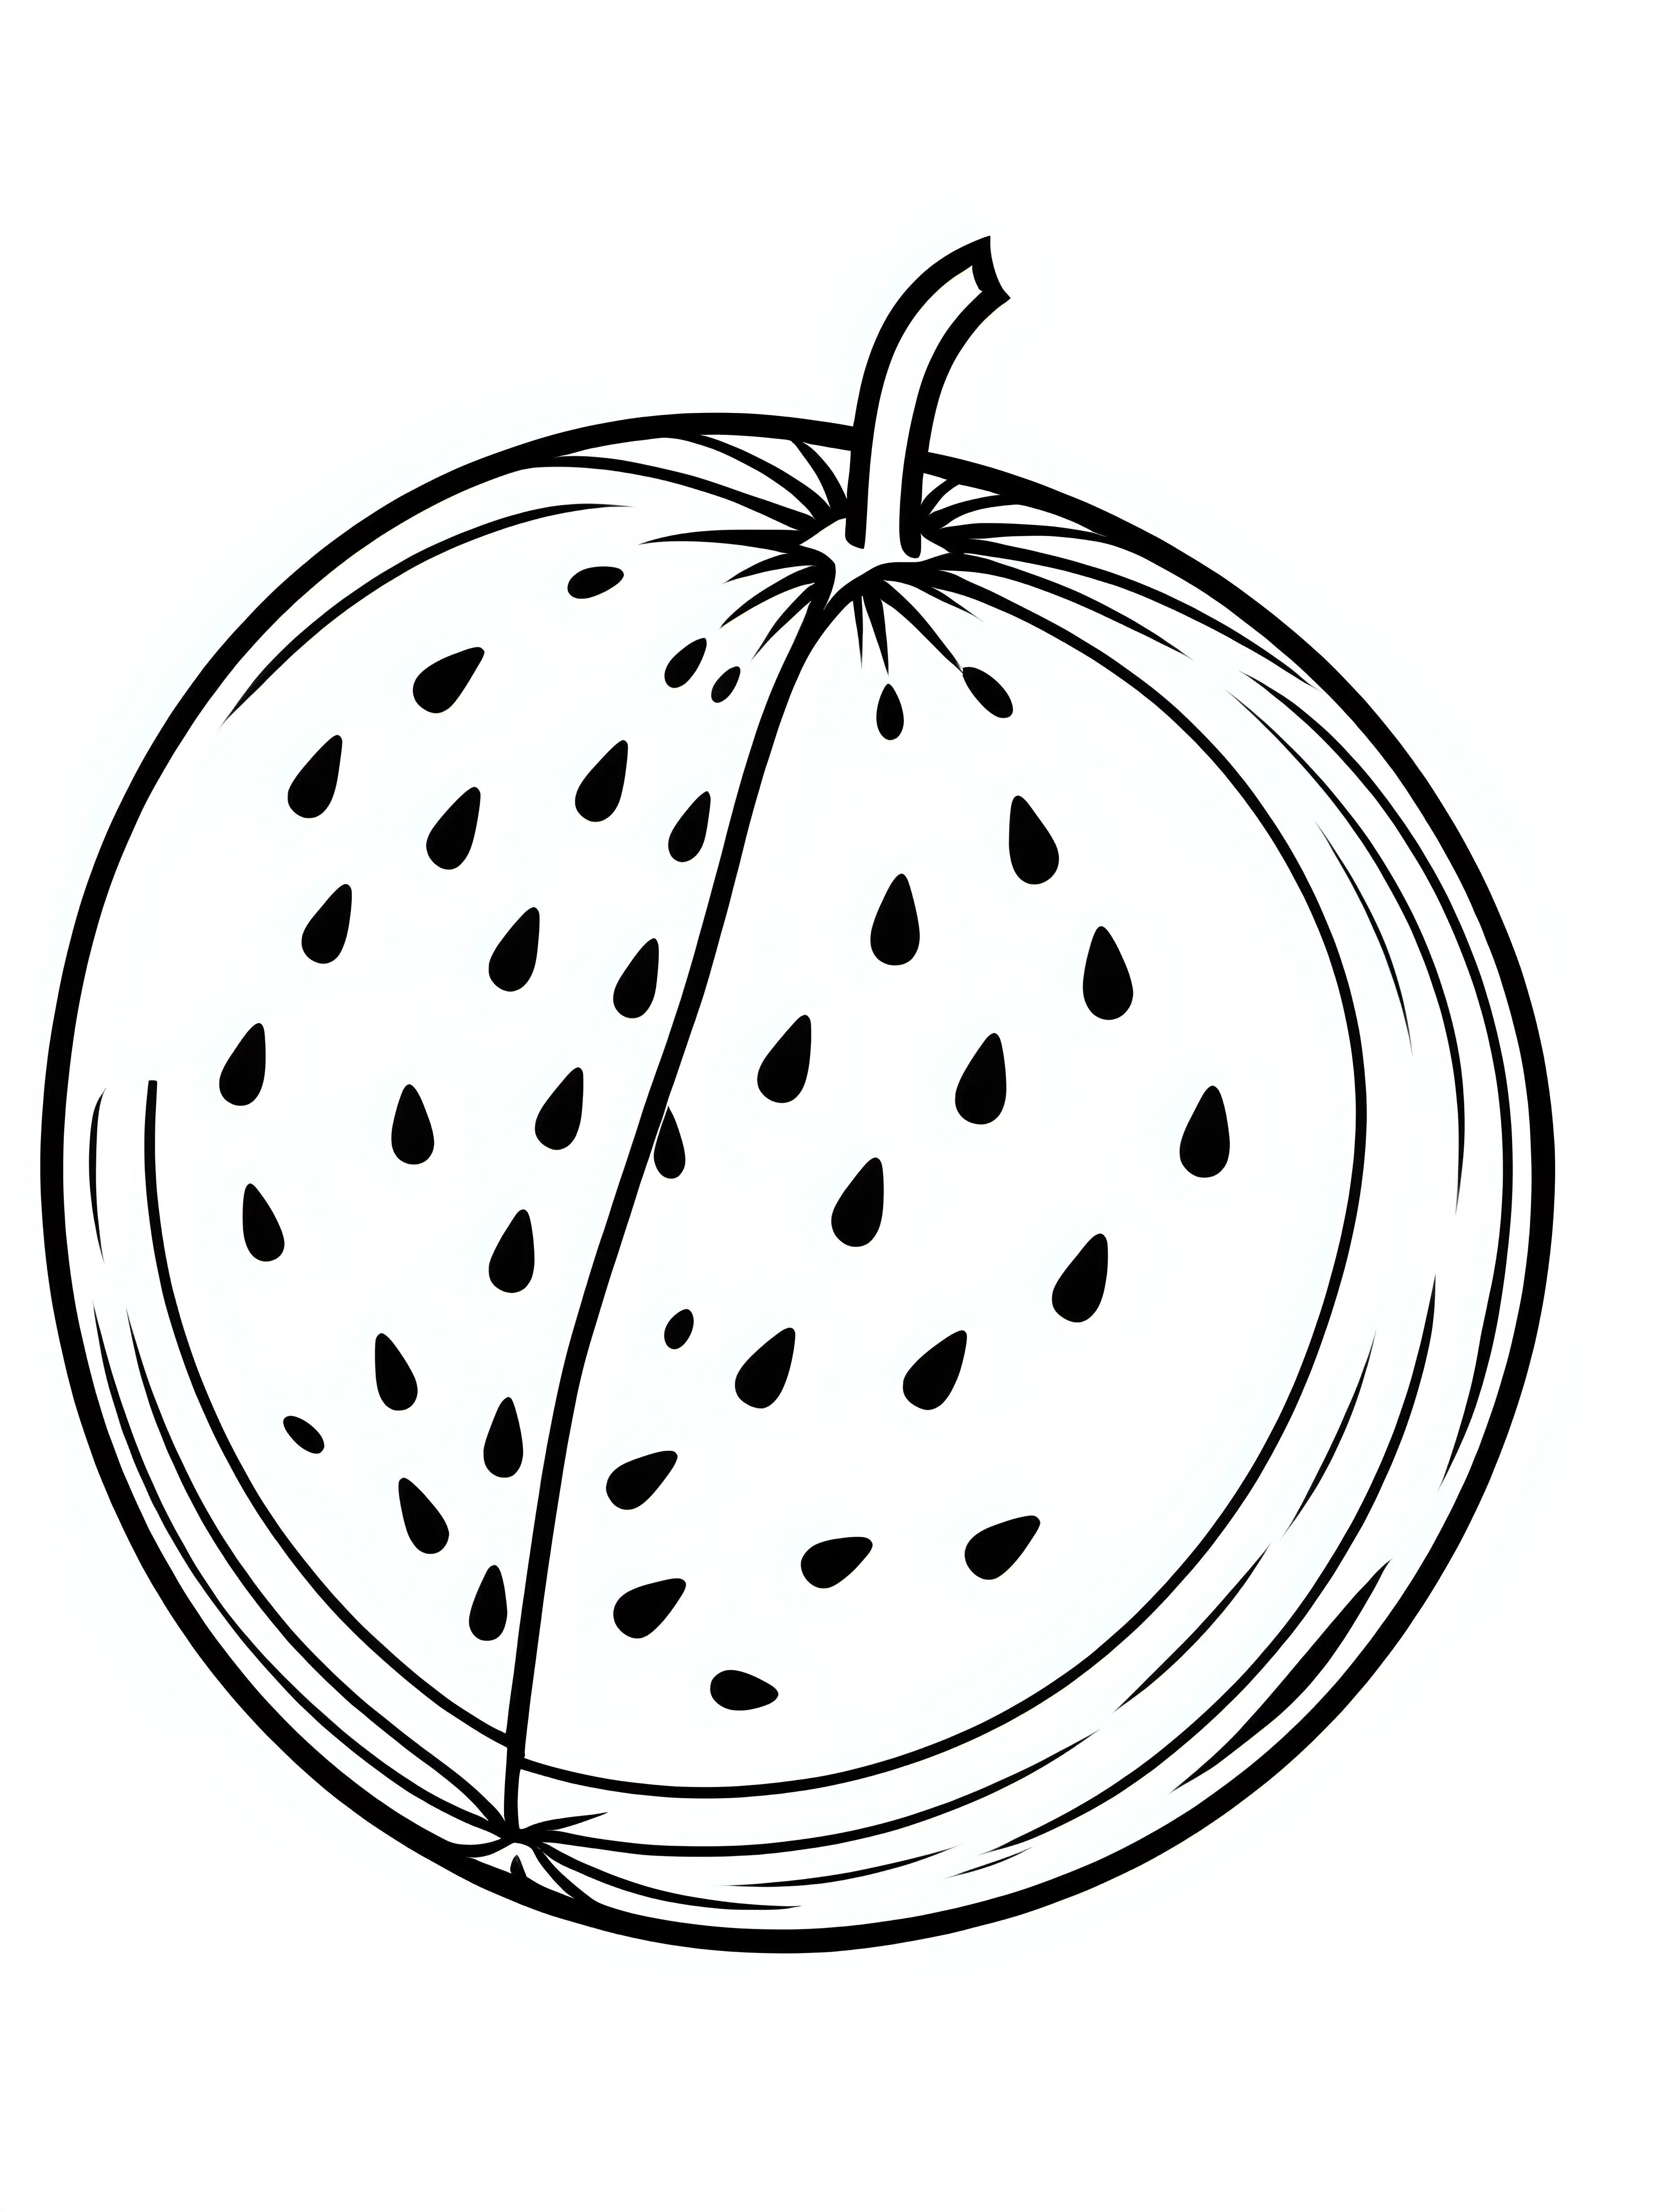 Watermelon Coloring Page for Kids Simple Outline Drawing on White Background